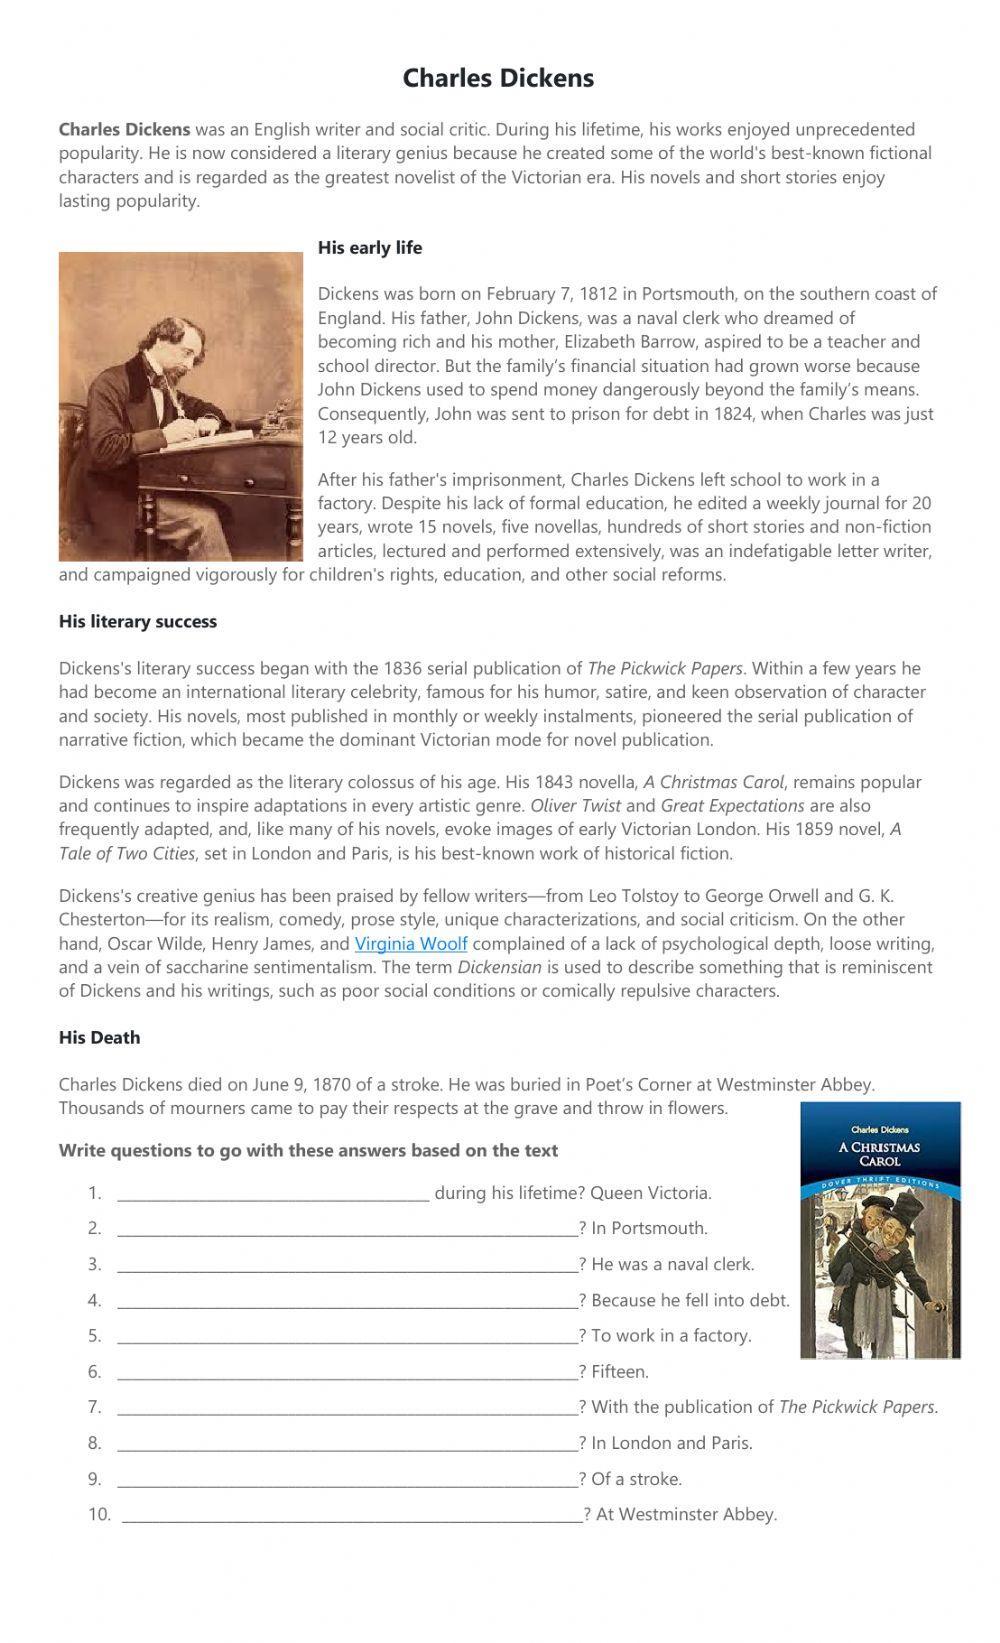 Charles Dickens' biography